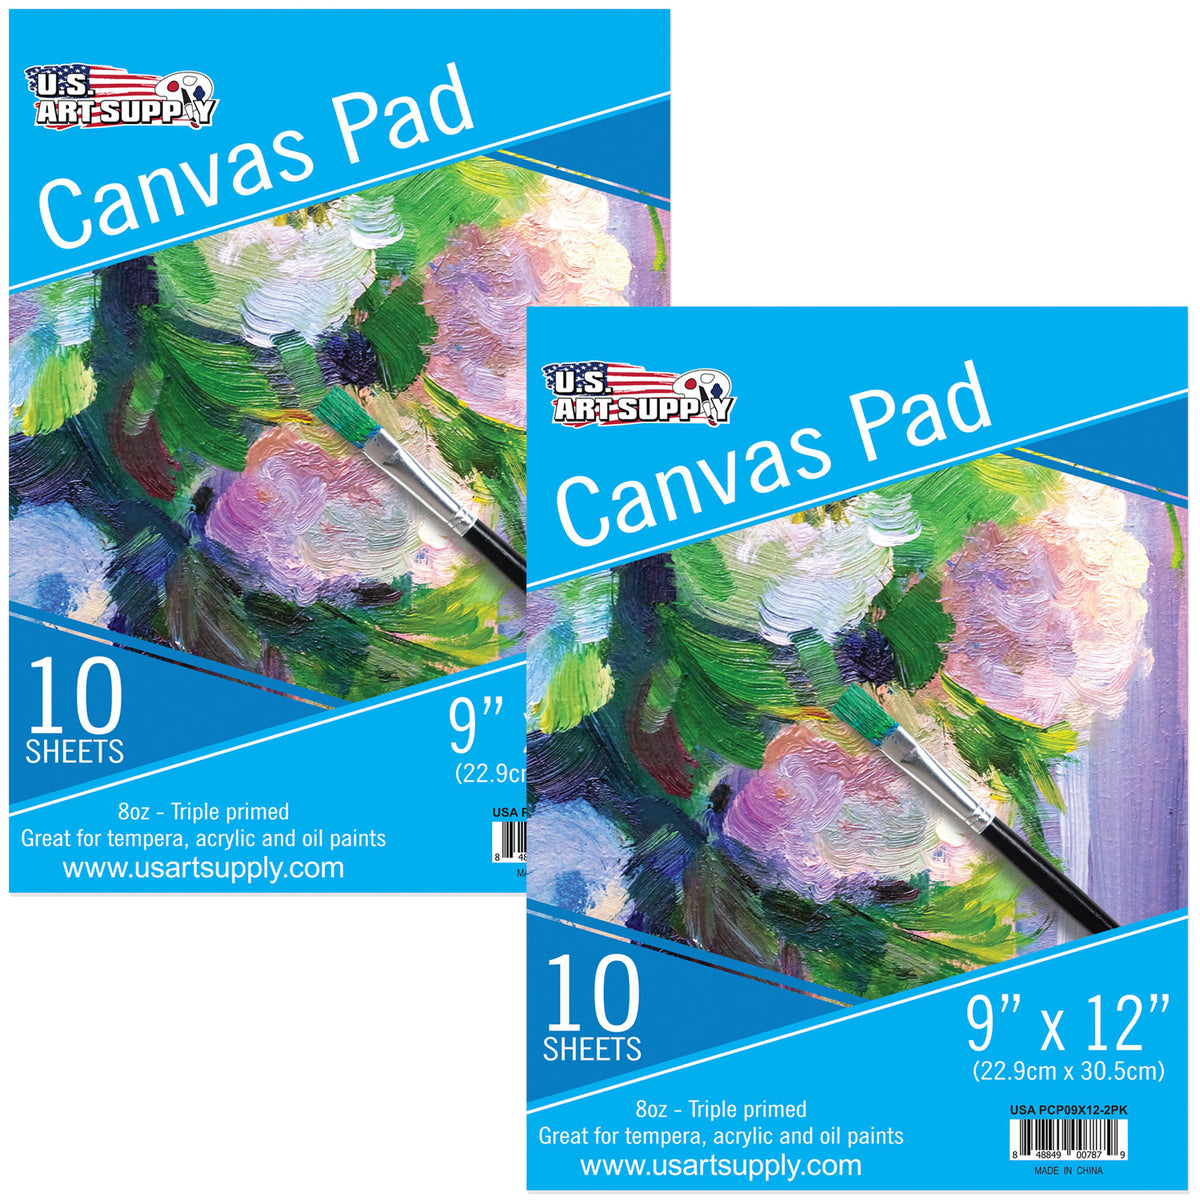 U.S. Art Supply 9 x 12 10-Sheet 8-Ounce Triple Primed Acid-Free Canvas Paper Pad (Pack of 2 Pads)